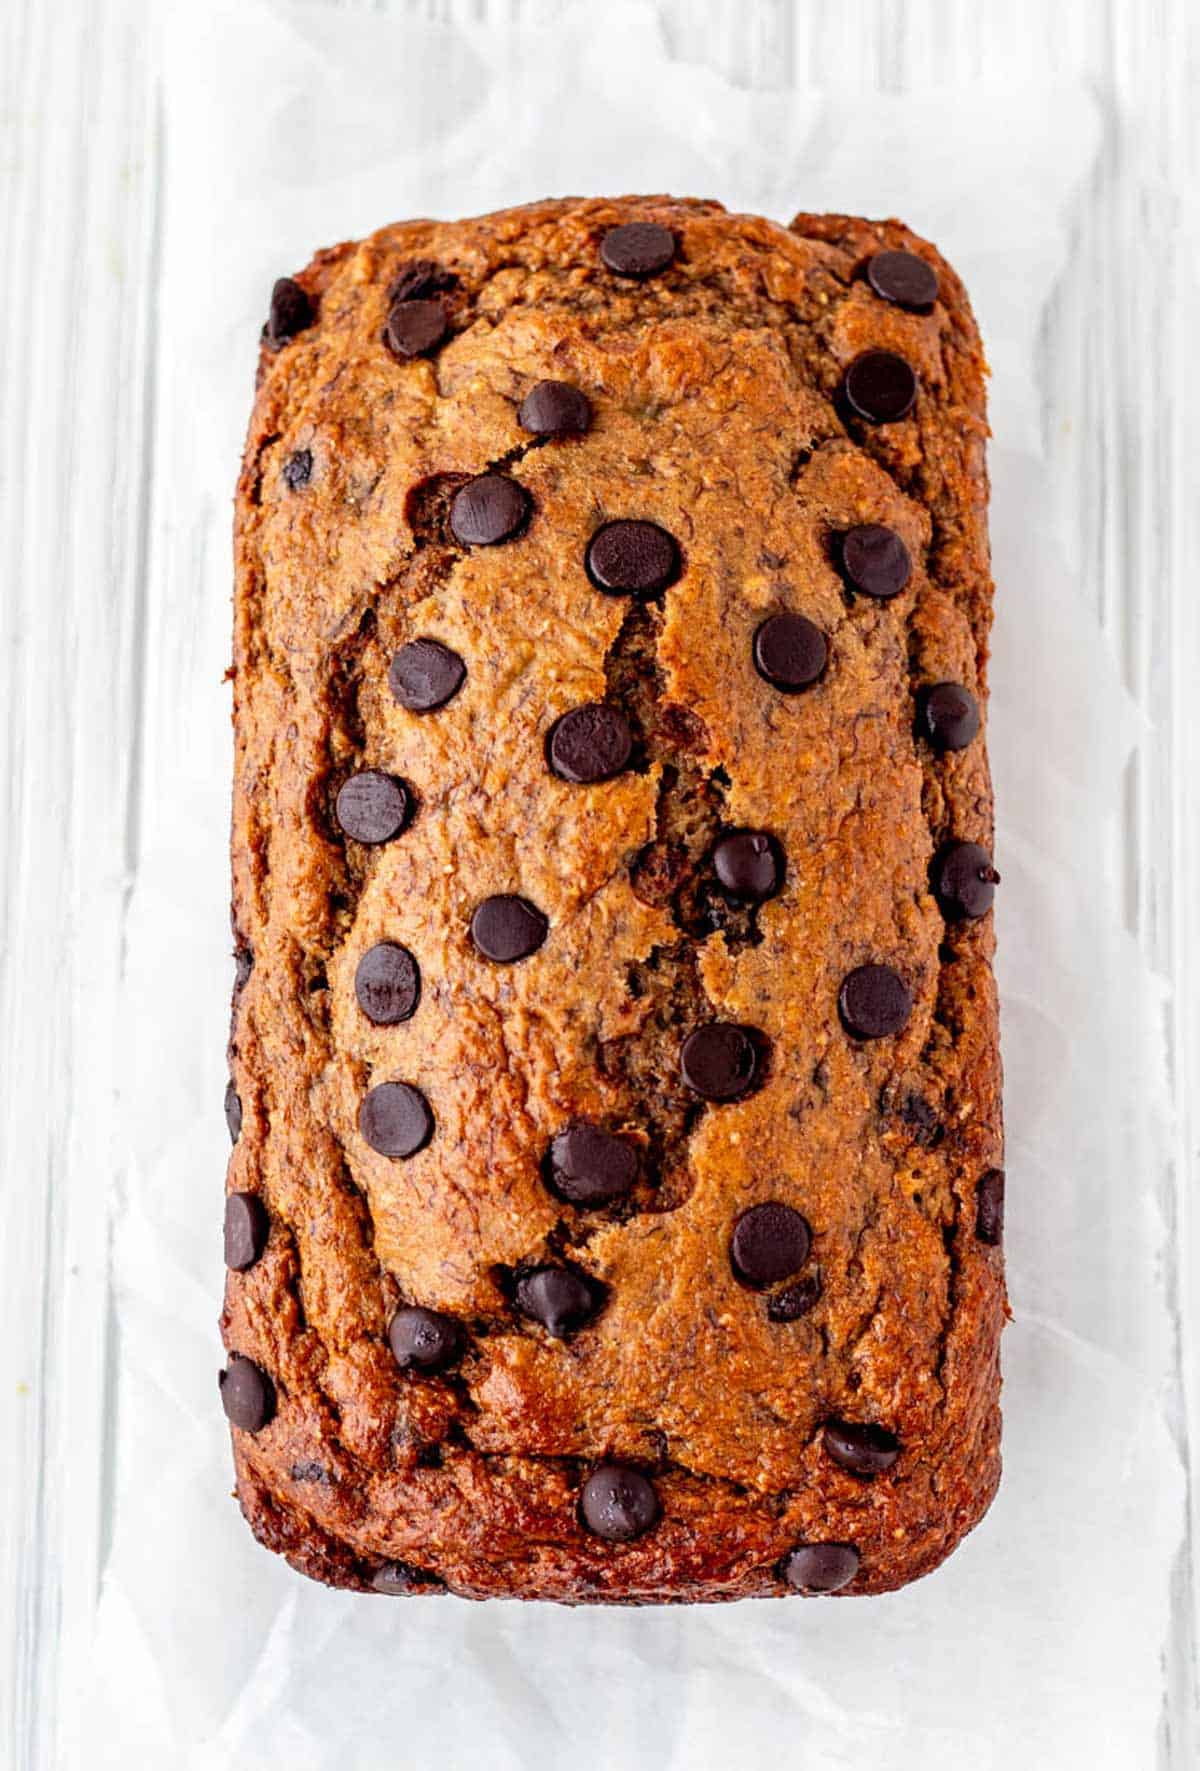 A baked loaf of 2 banana bread with dark chocolate chips.